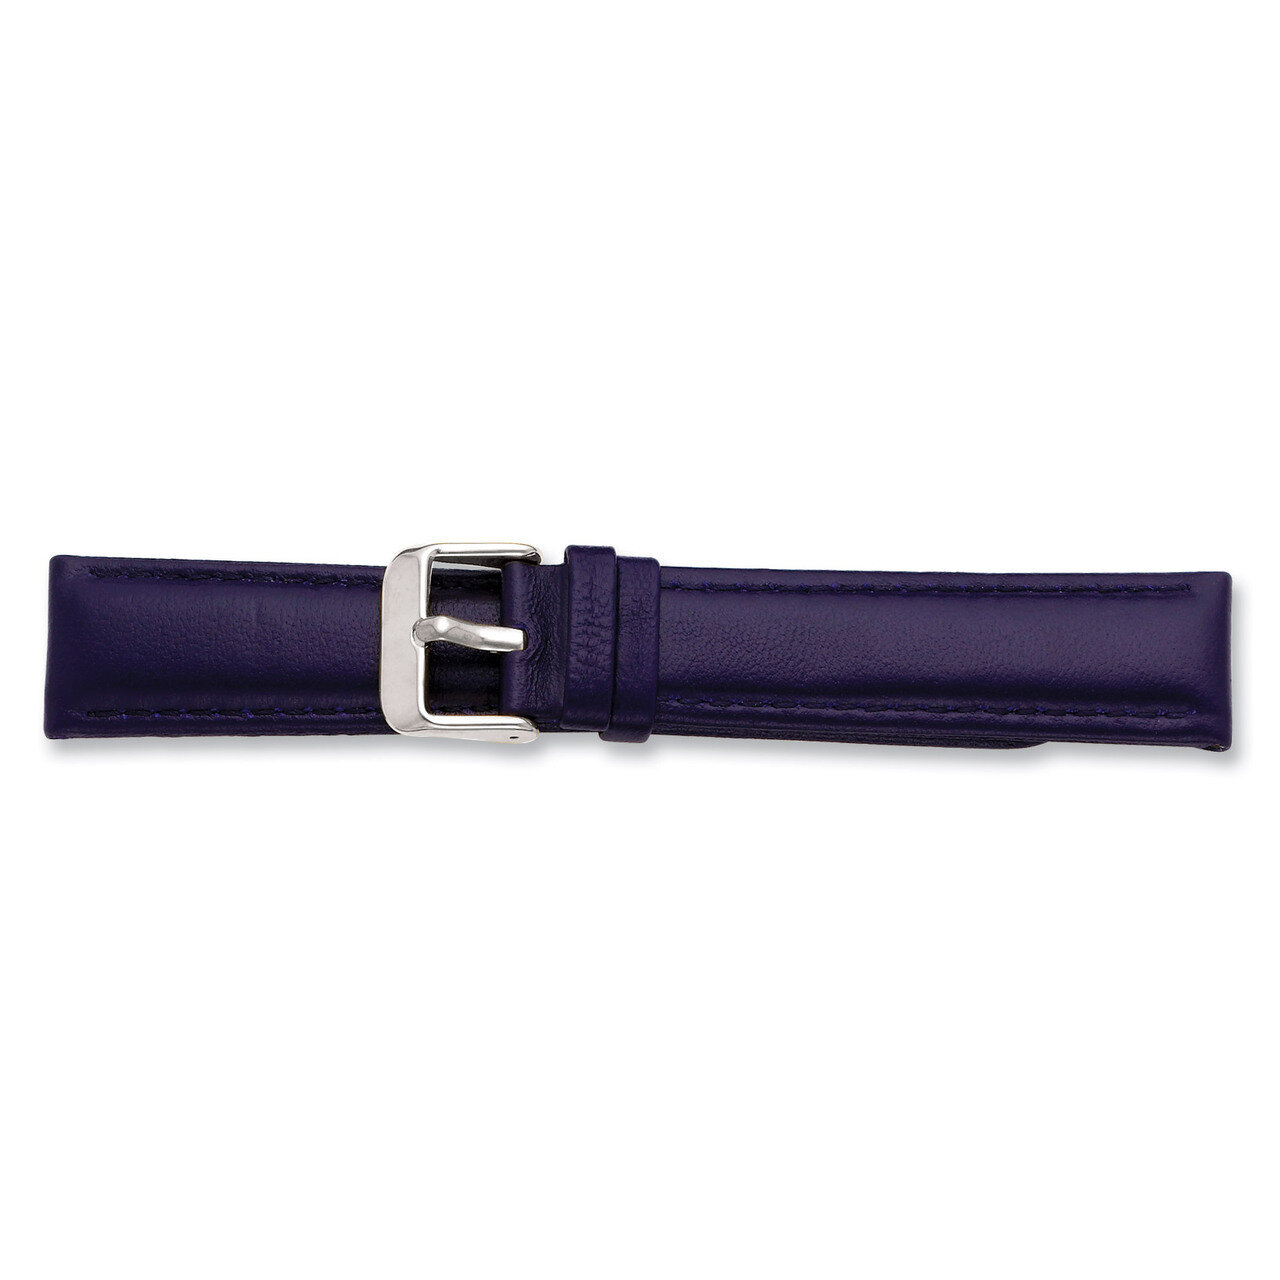 24mm Navy Glove Leather Watch Band 7.75 Inch Silver-tone Buckle BAW198-24